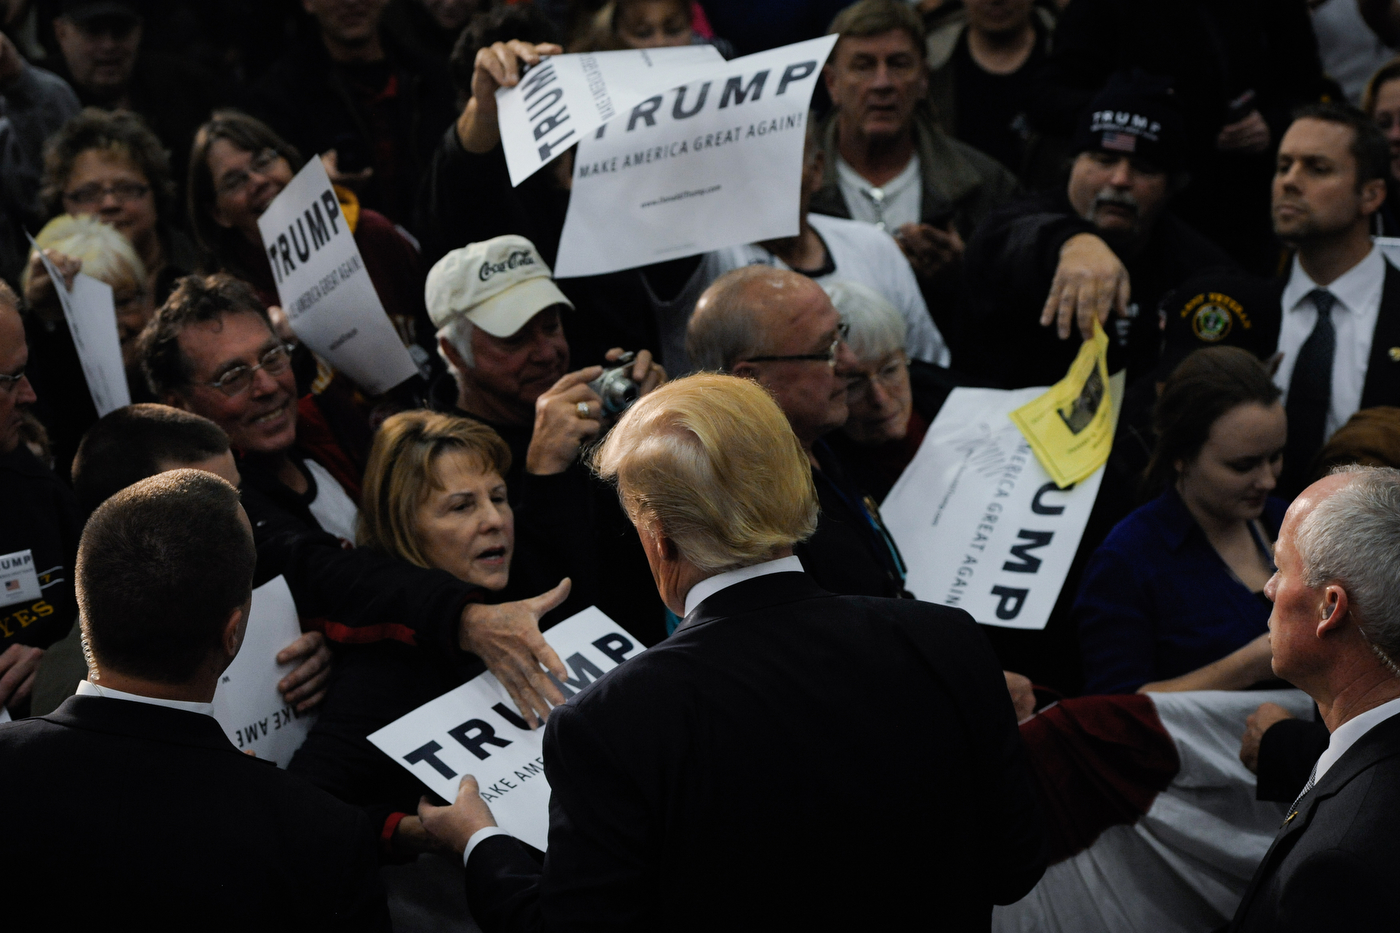  A supporter of Republican U.S. presidential candidate Donald Trump reaches out for a handshake after a rally in Spencer, Iowa on December 5, 2015.  